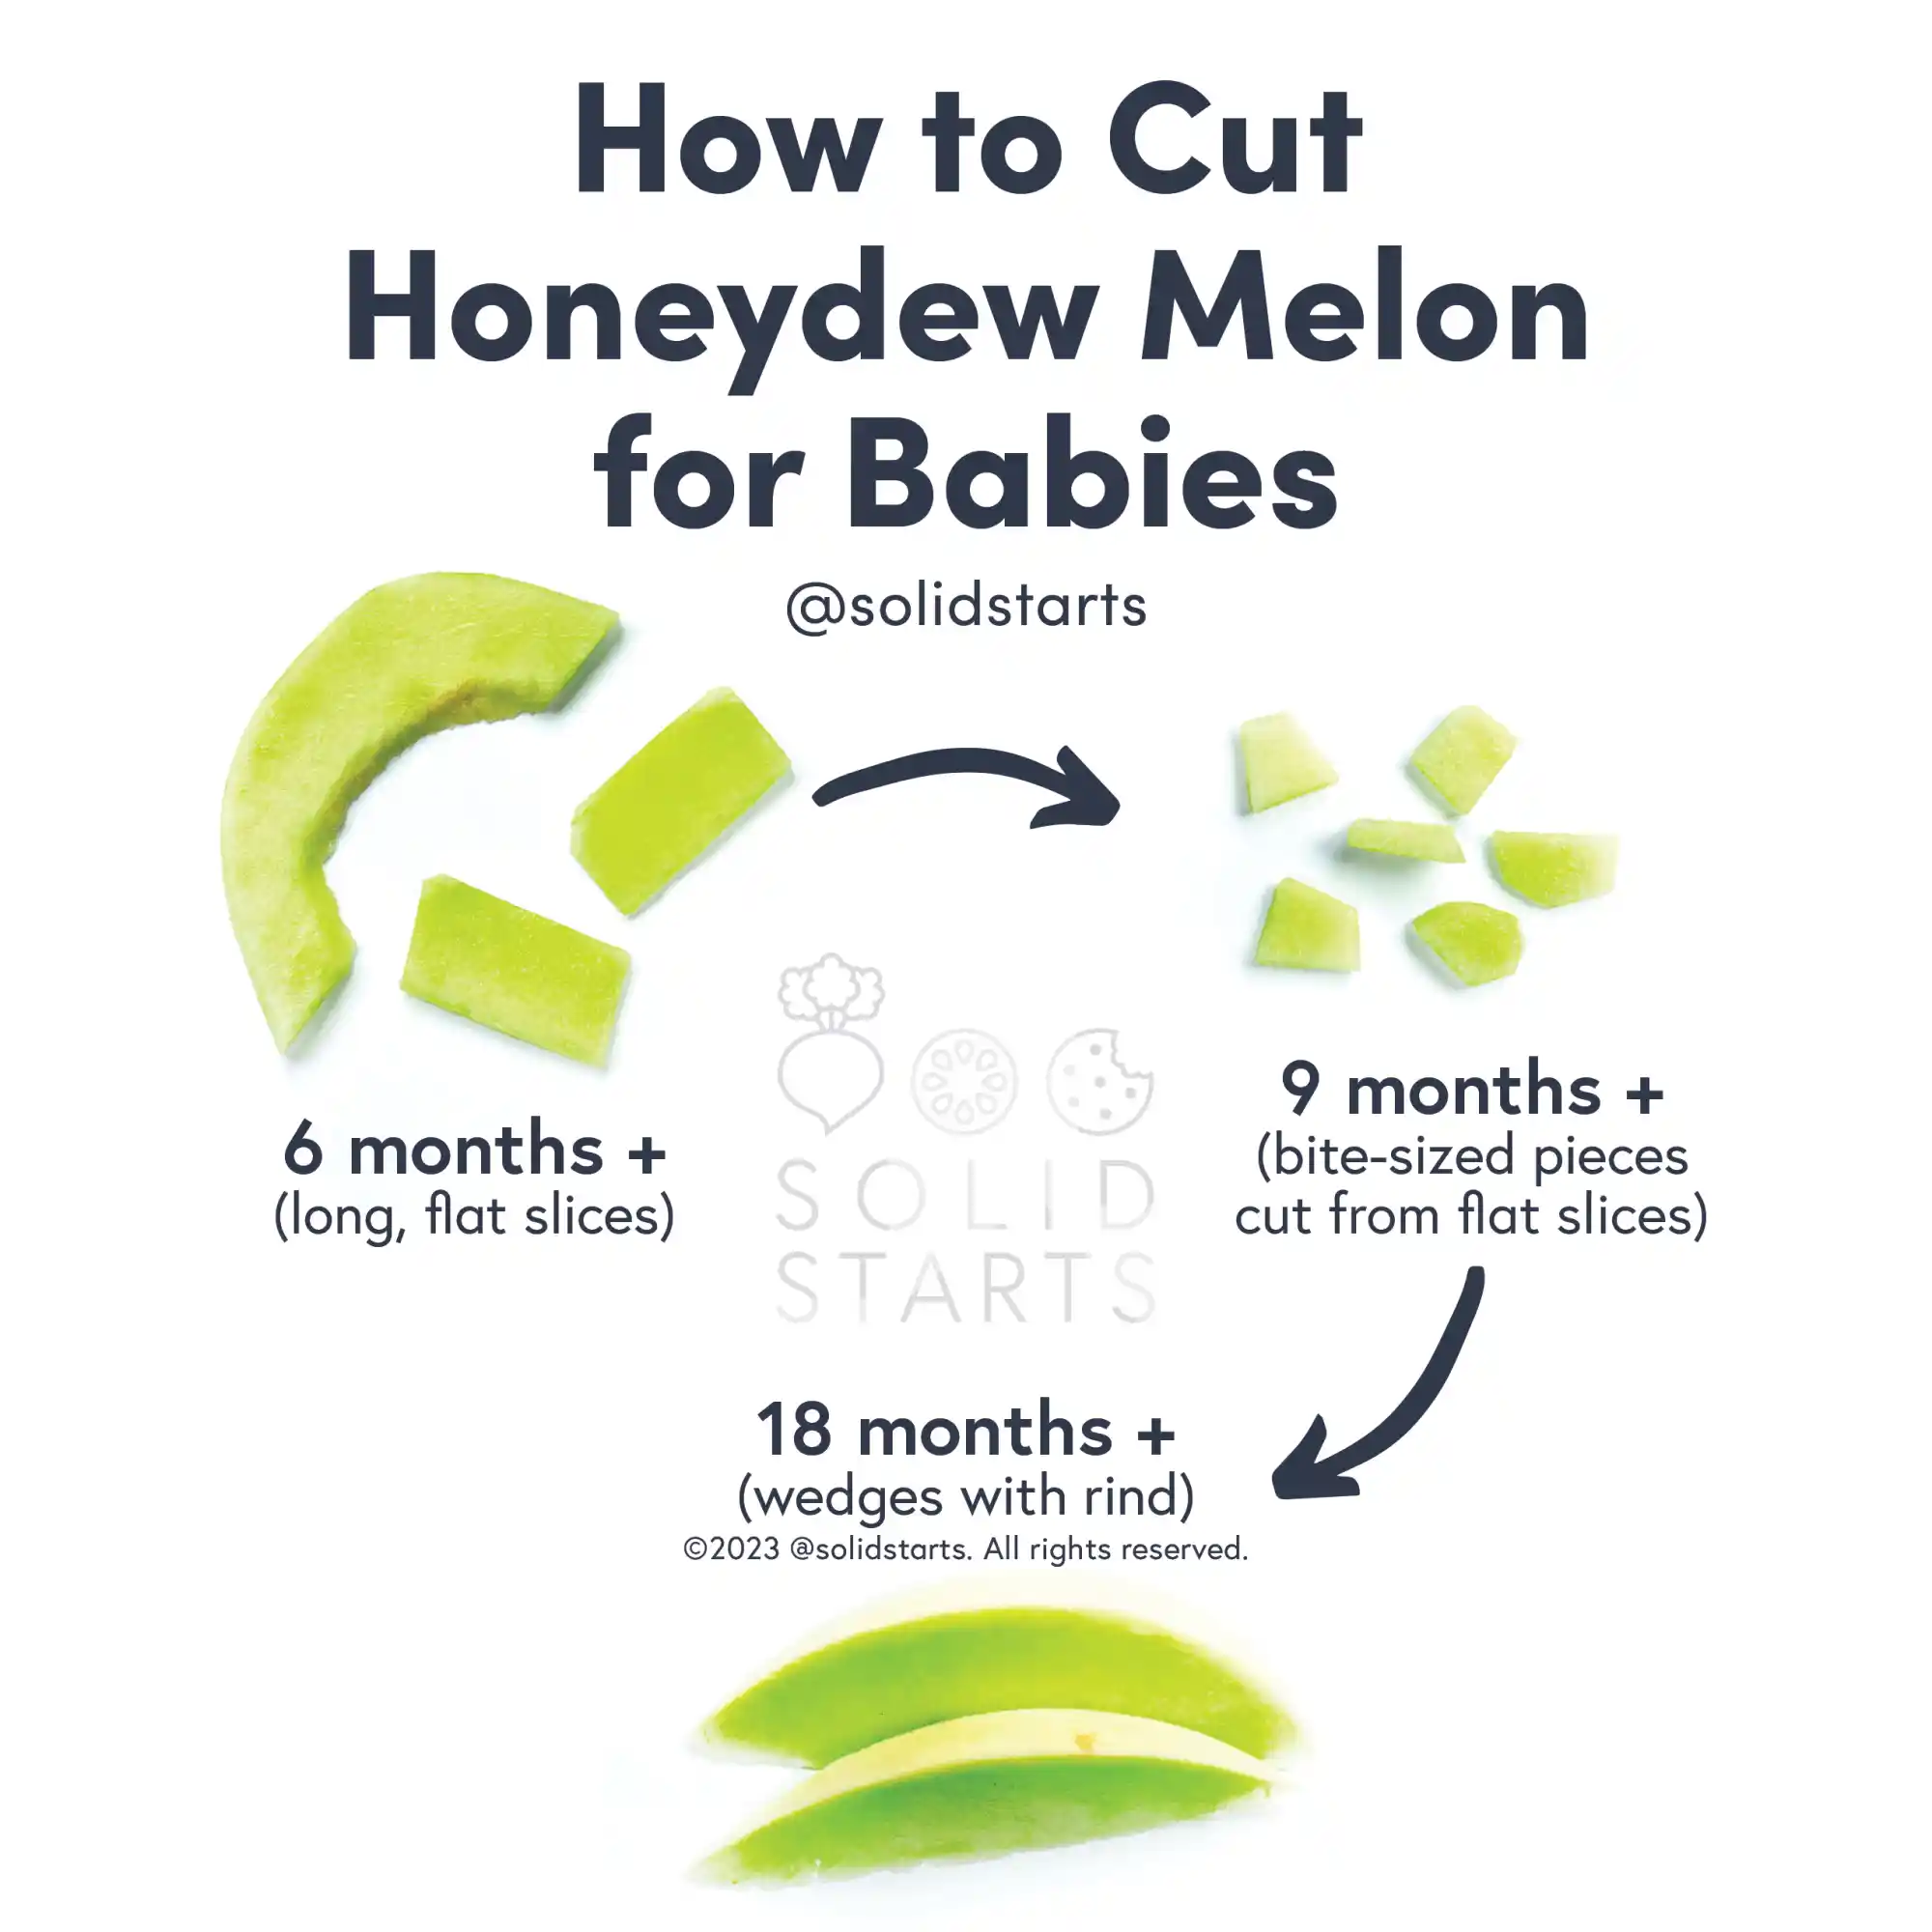 a Solid Starts infographic with the header How to Cut Honeydew Melon for Babies: long flat slices for 6 months+, bite-sized pieces cut from flat slice for 9 months+, wedges on the rind for 18 months+